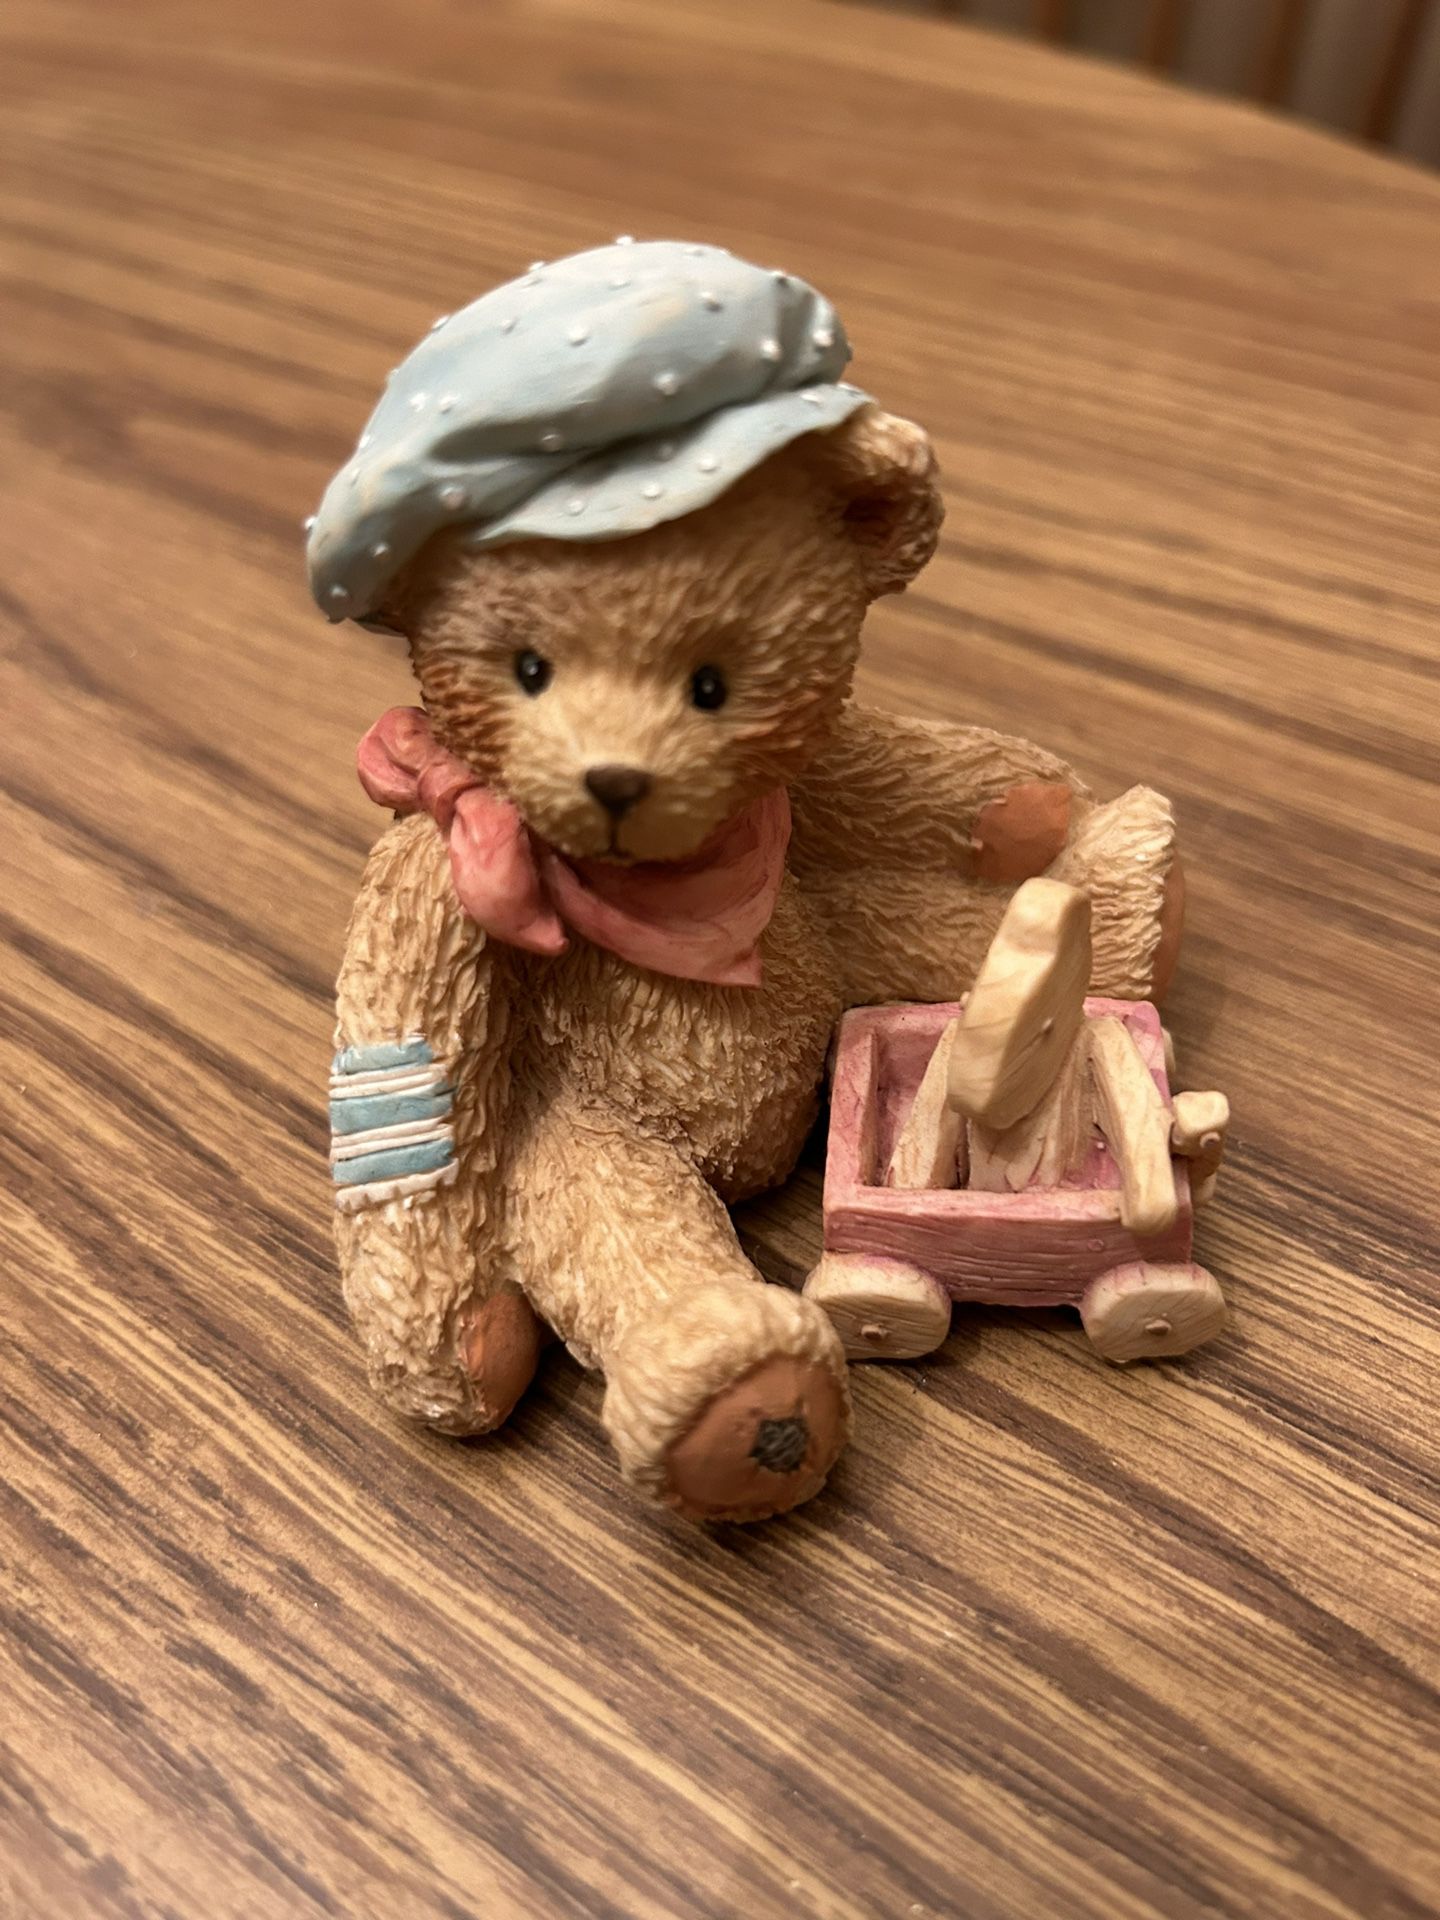 Cherished teddies Harrison - we're going places